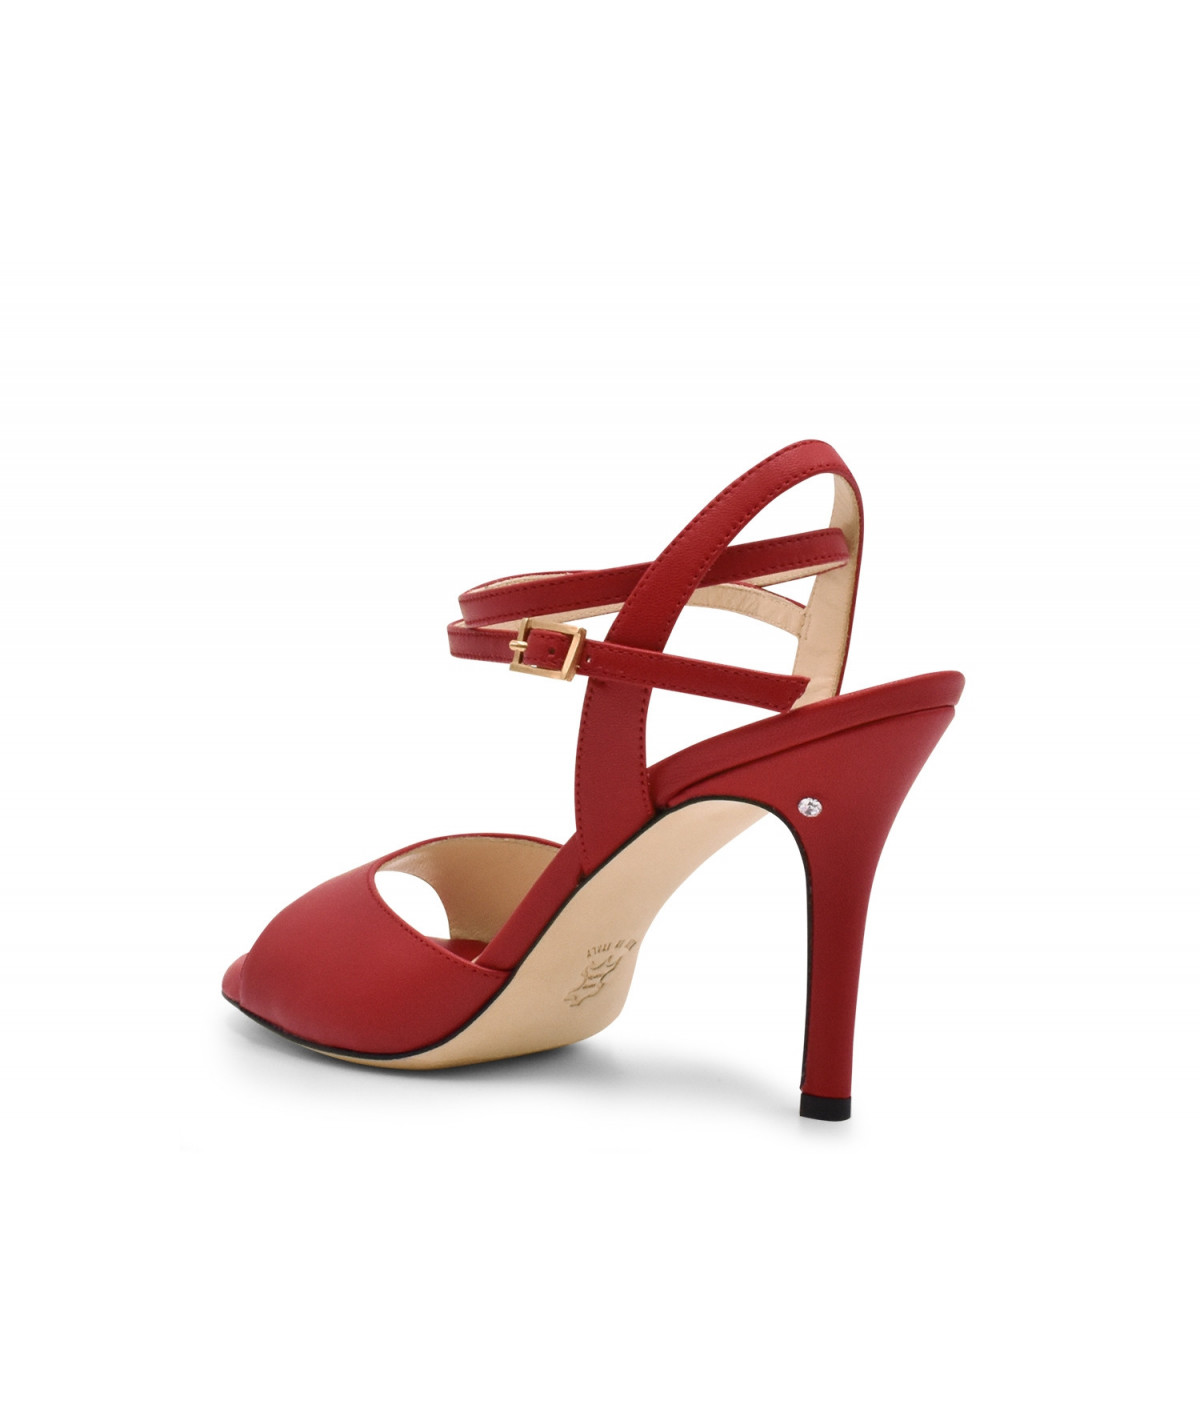 Madame Pivot - Cherie - Red Leather - Sandrina Dh